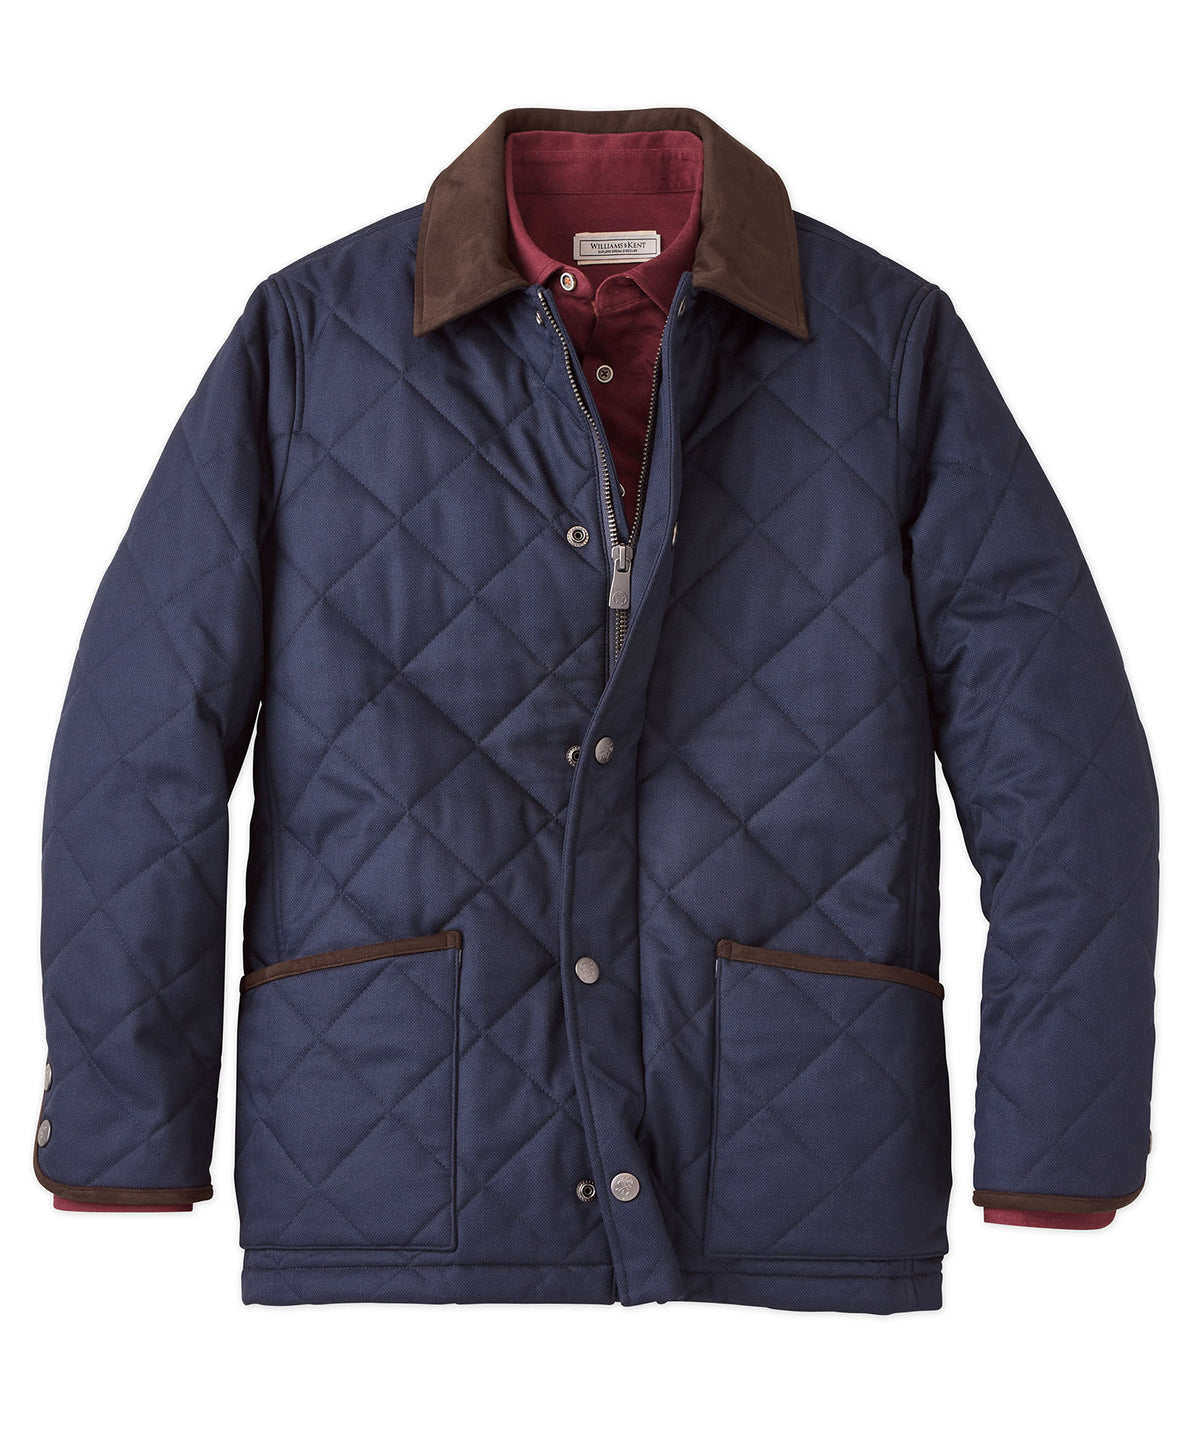 Hart Schaffner Marx Quilted Riding Jacket with Sueded Trim